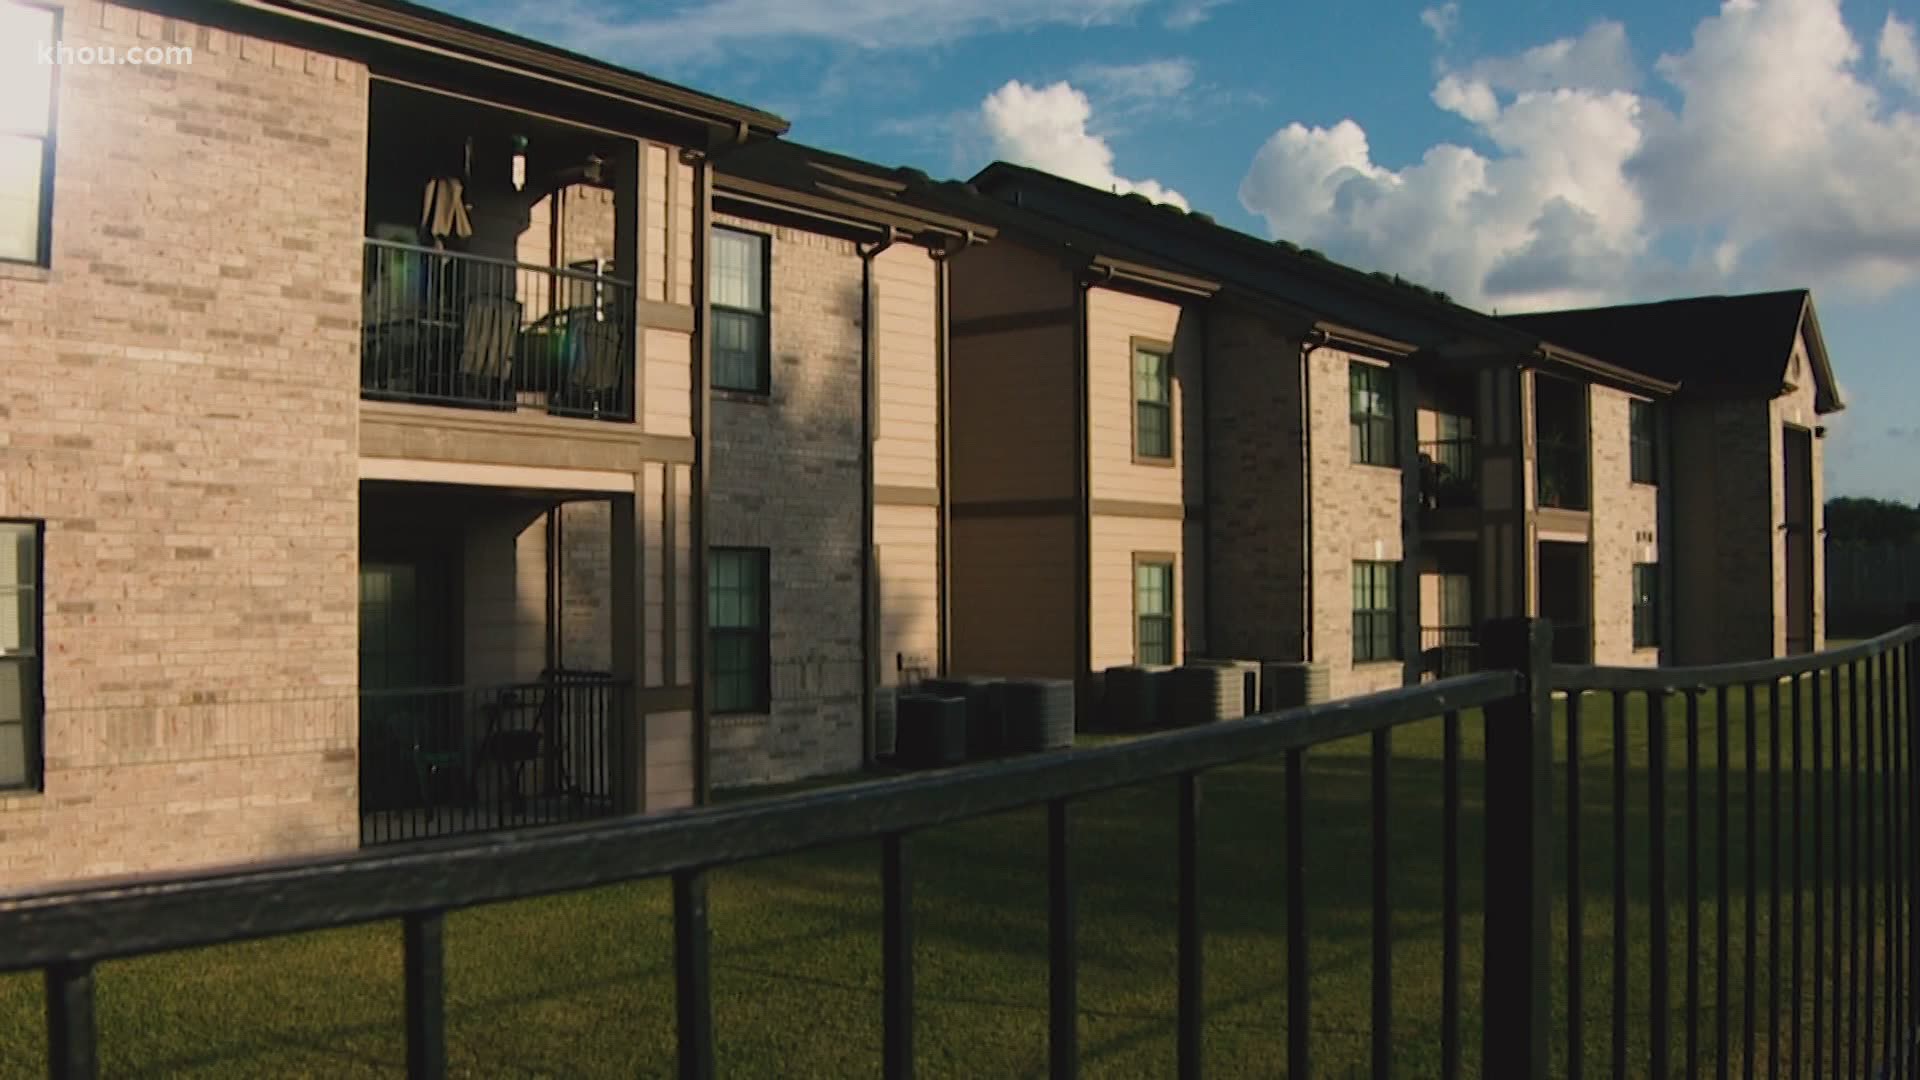 KHOU 11 Investigates discovered 975 evictions filed in Harris County justice courts since the Texas Supreme Court first ruled on the issue March 19